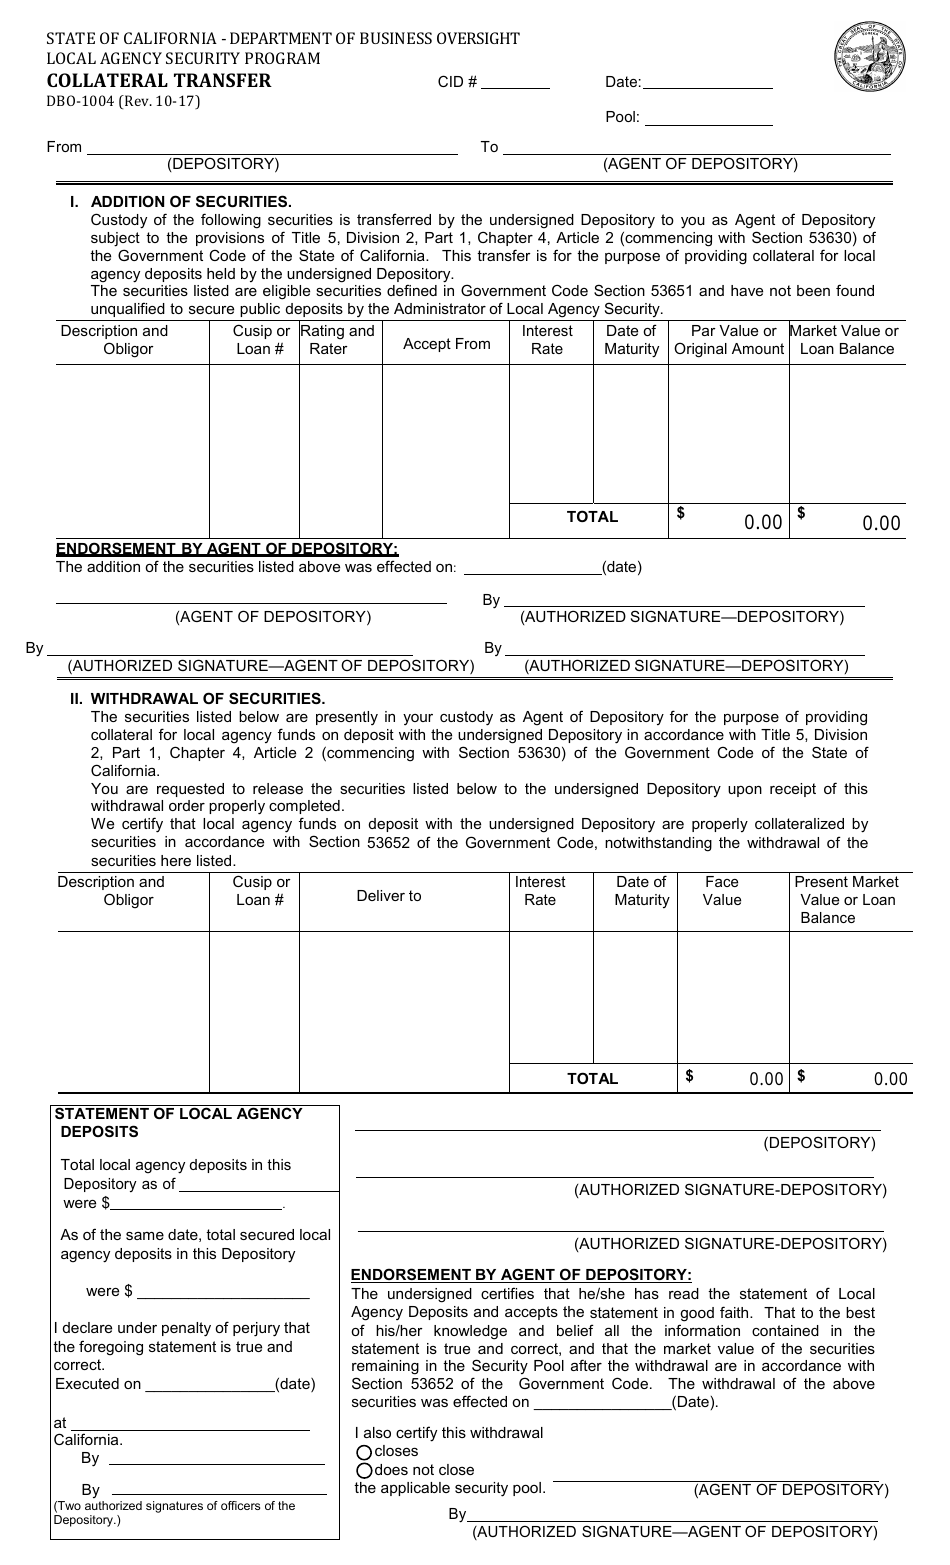 Form DBO-1004 Collateral Transfer - Local Agency Security Program - California, Page 1